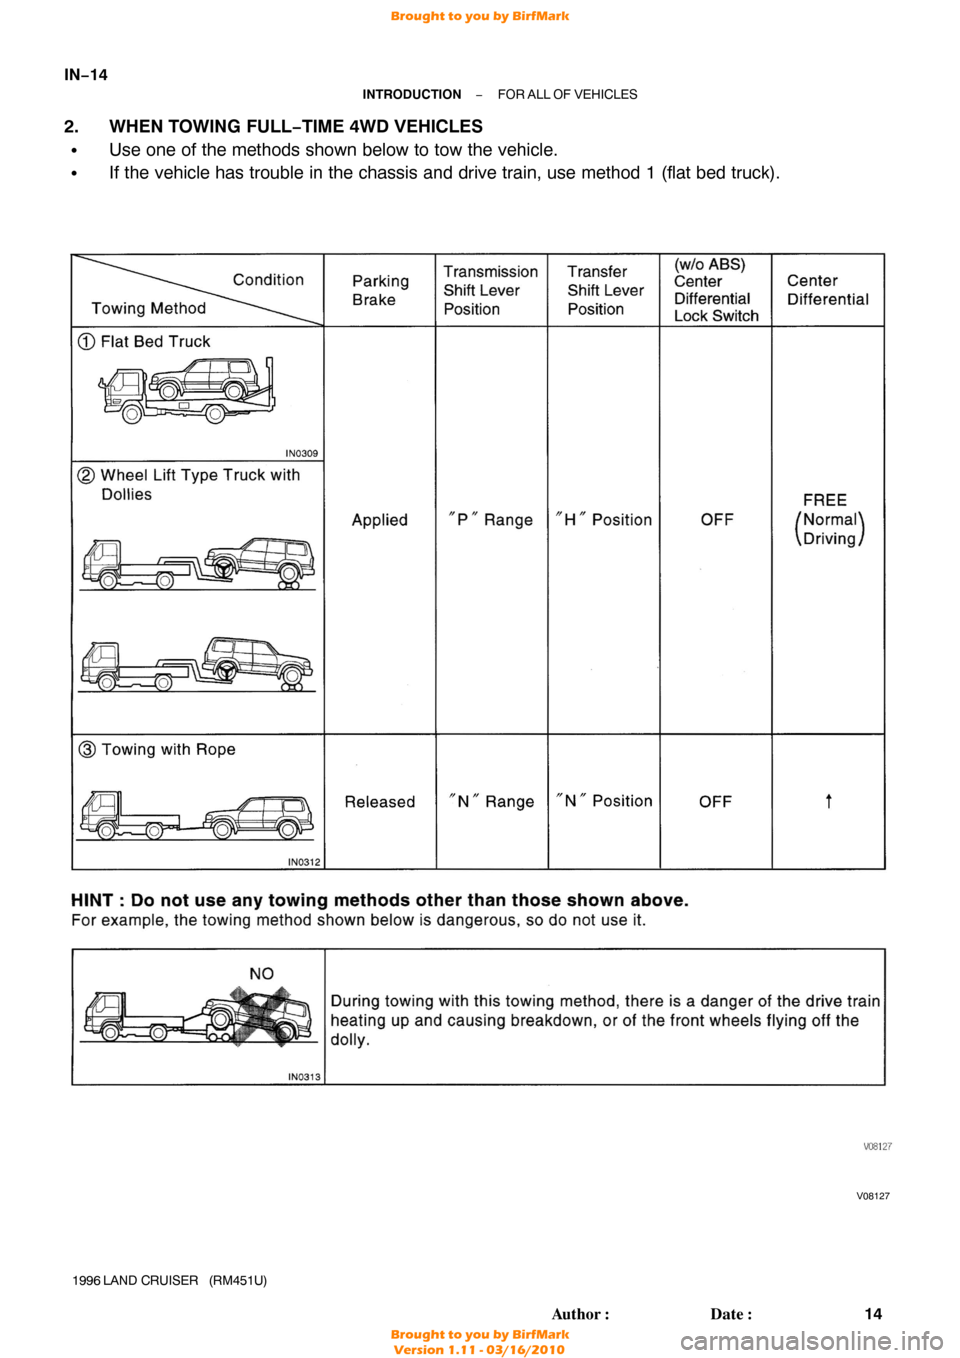 TOYOTA LAND CRUISER 1996 J80 Workshop Manual V08127
IN−14
−
INTRODUCTION FOR ALL OF VEHICLES
14
Author: Date:
1996 LAND  CRUISER   (RM451U)
2. WHEN TOWING FULL −TIME 4WD VEHICLES
Use one of the methods shown below to tow the vehicle.
I